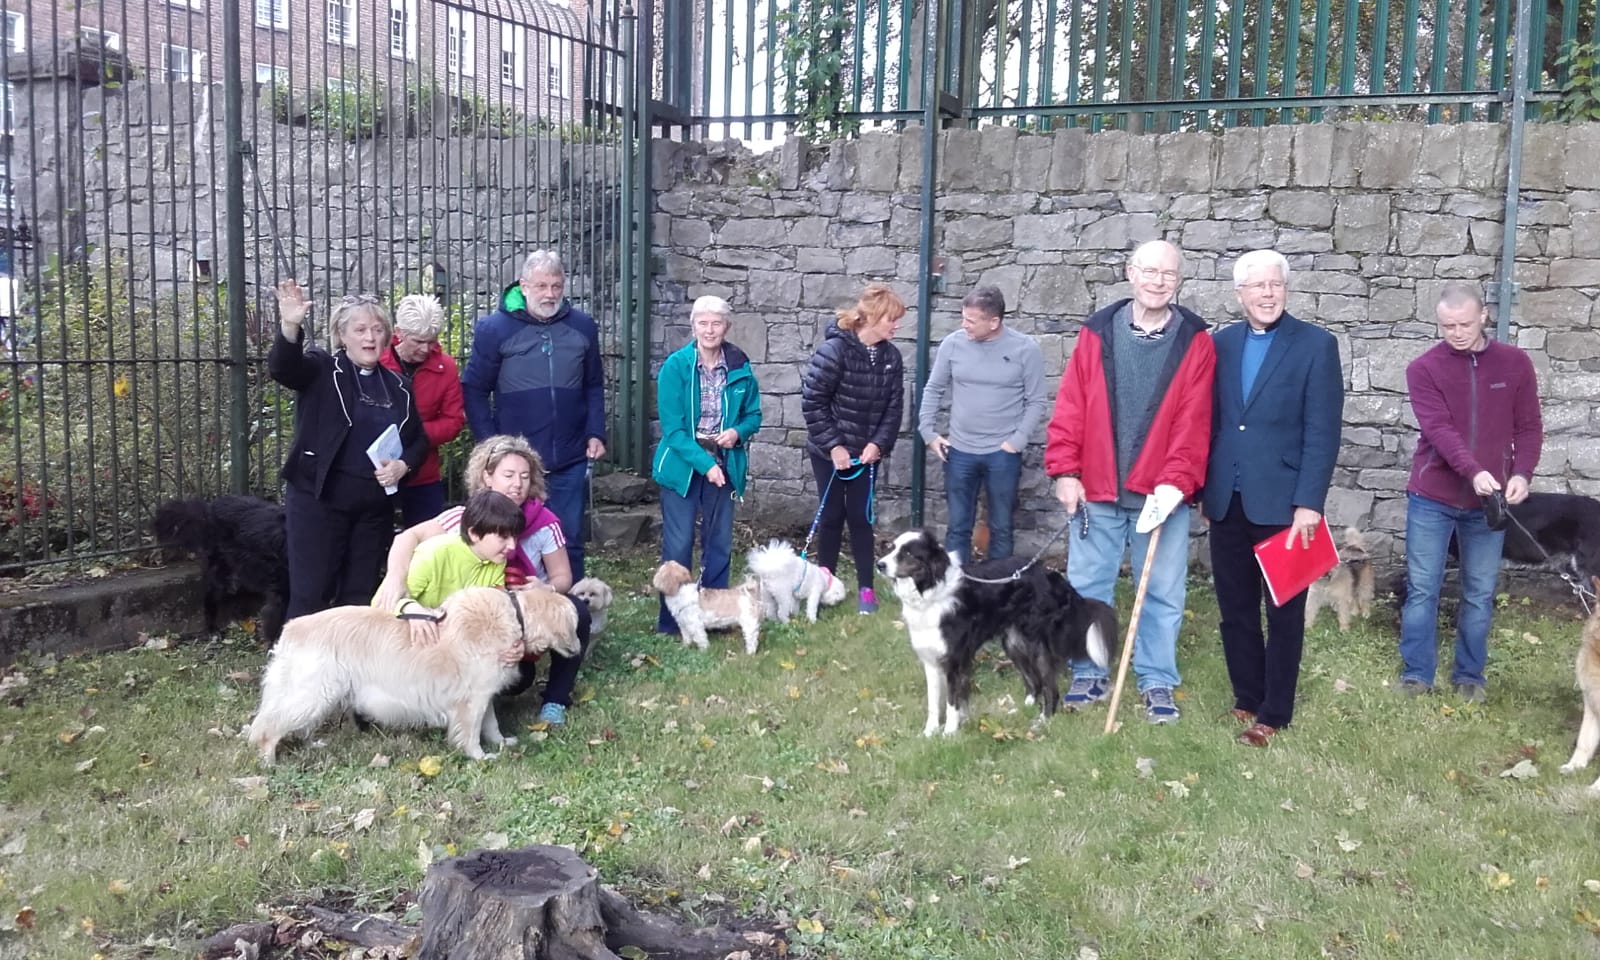 Limerick Blessing of Animals